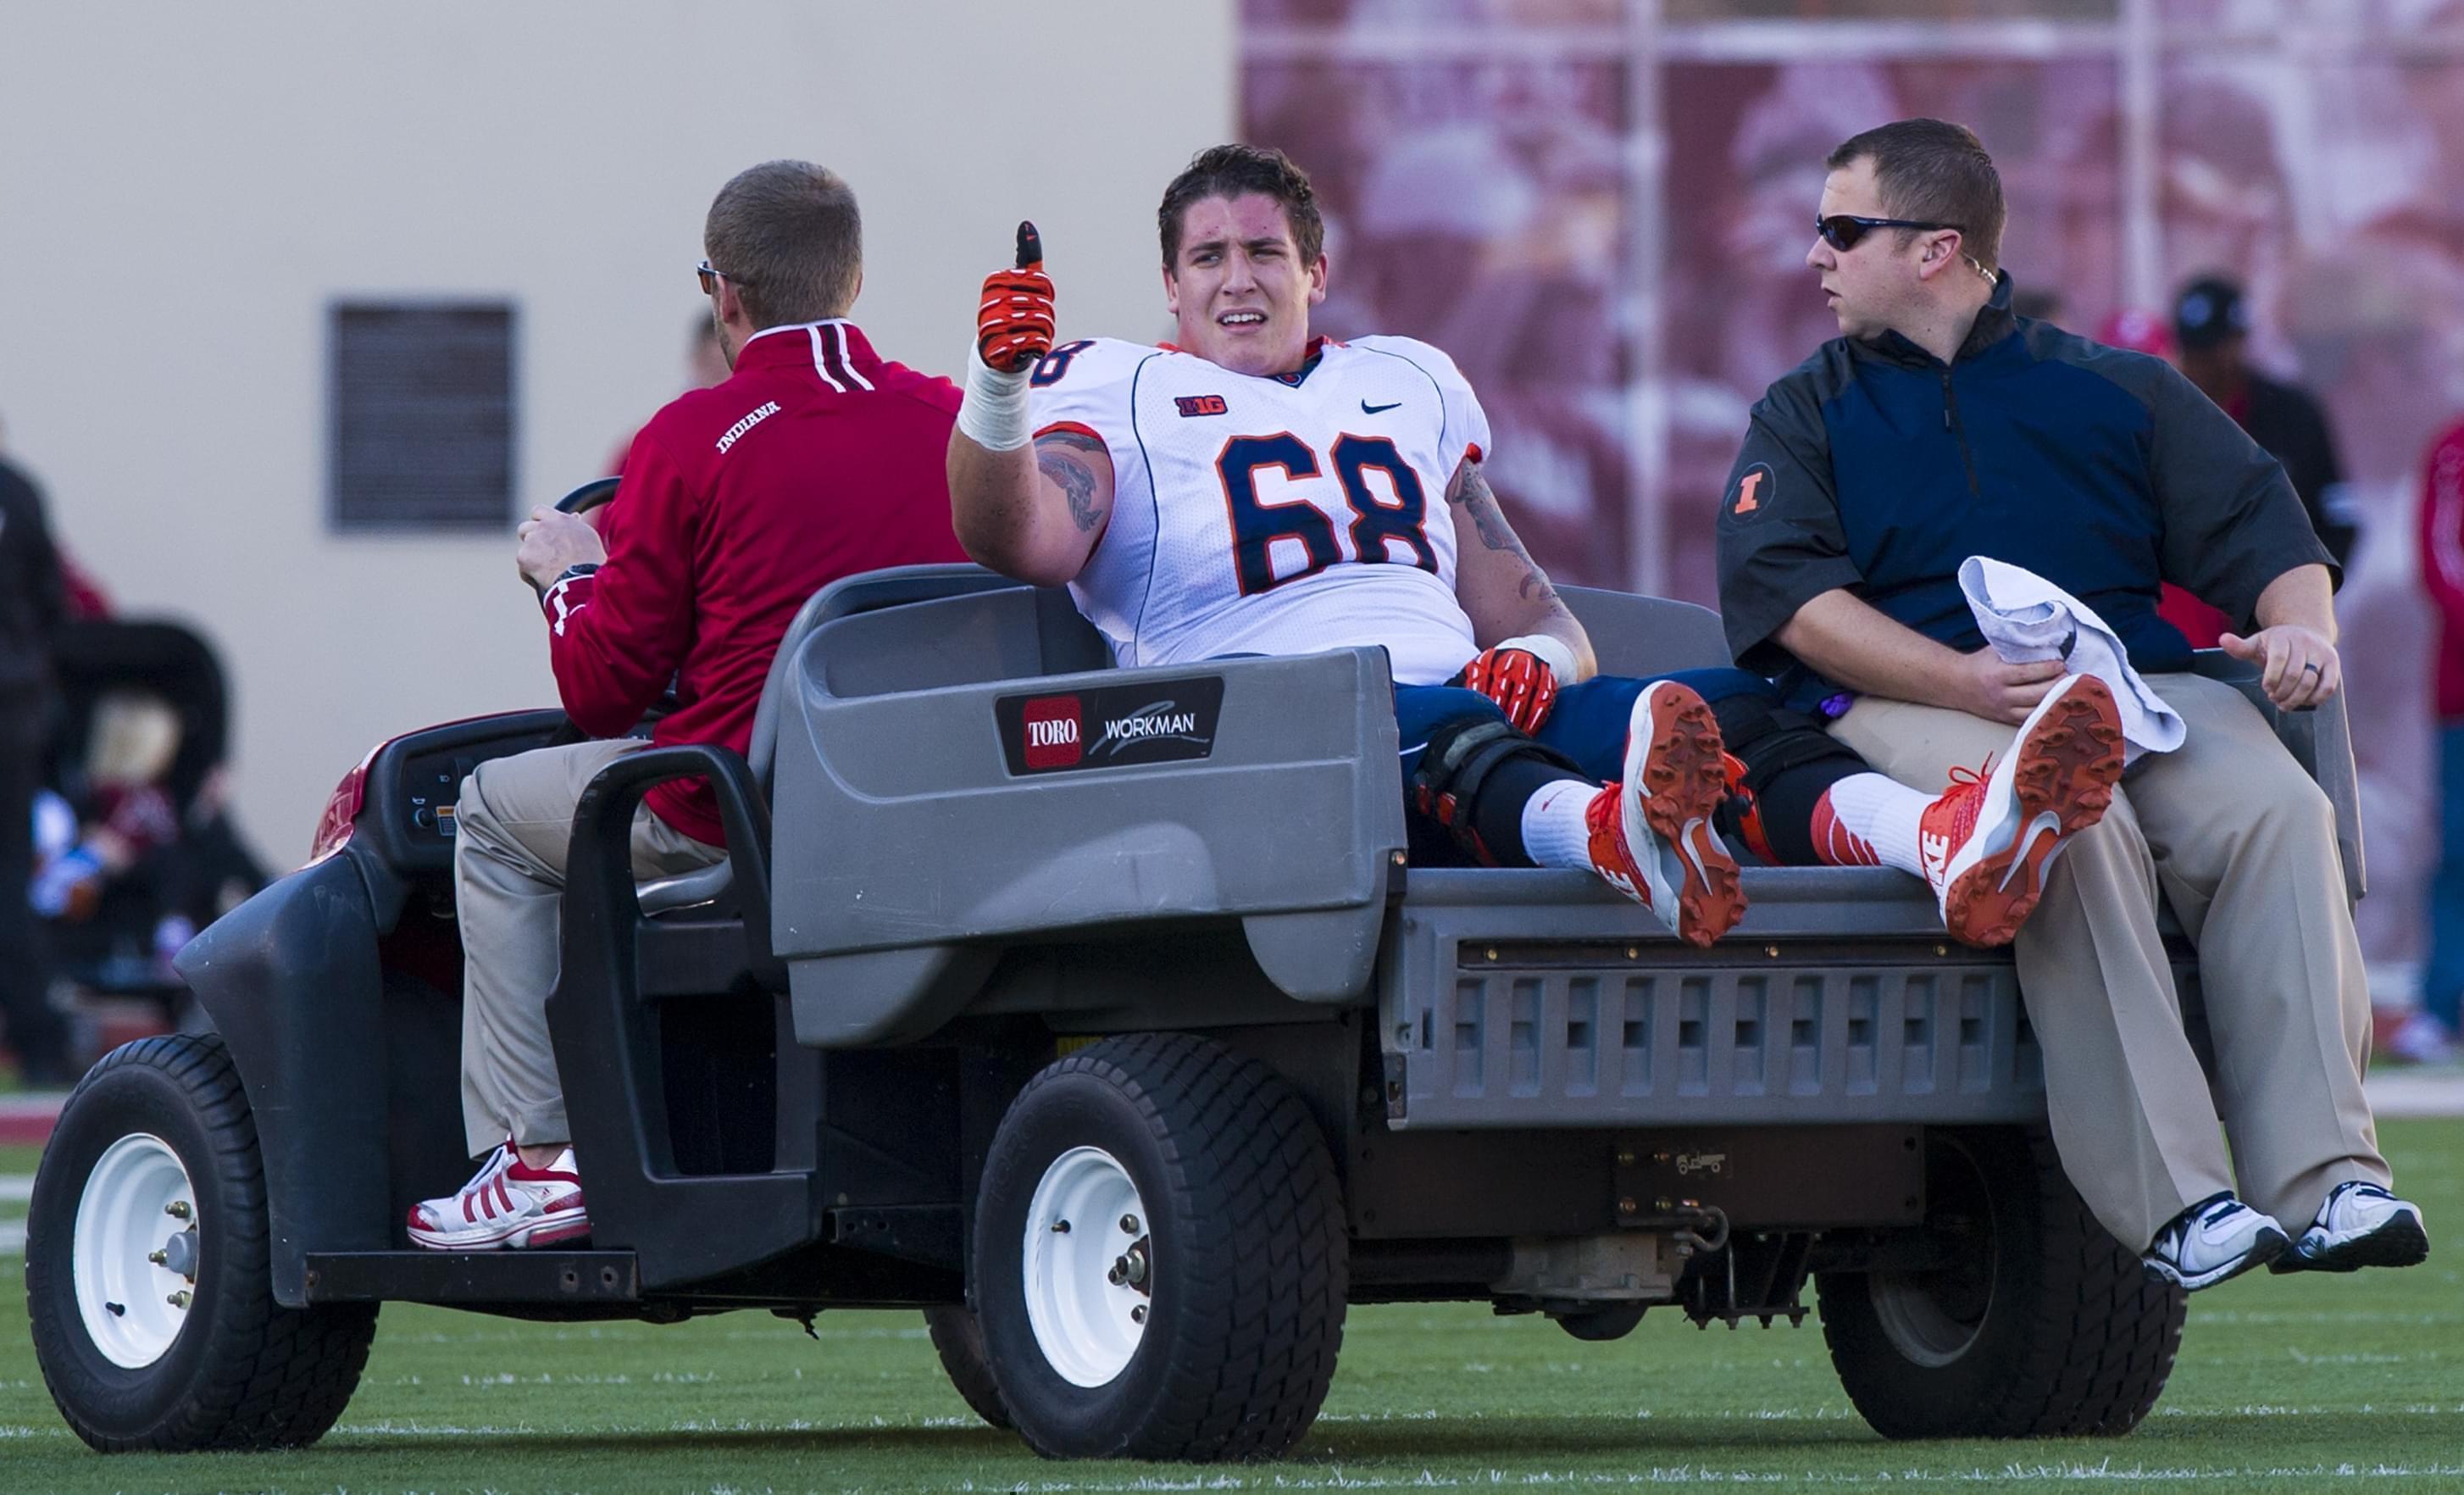 Illinois offensive linesman Simon Cvijanovic is taken from the field after being injured during an NCAA college football game